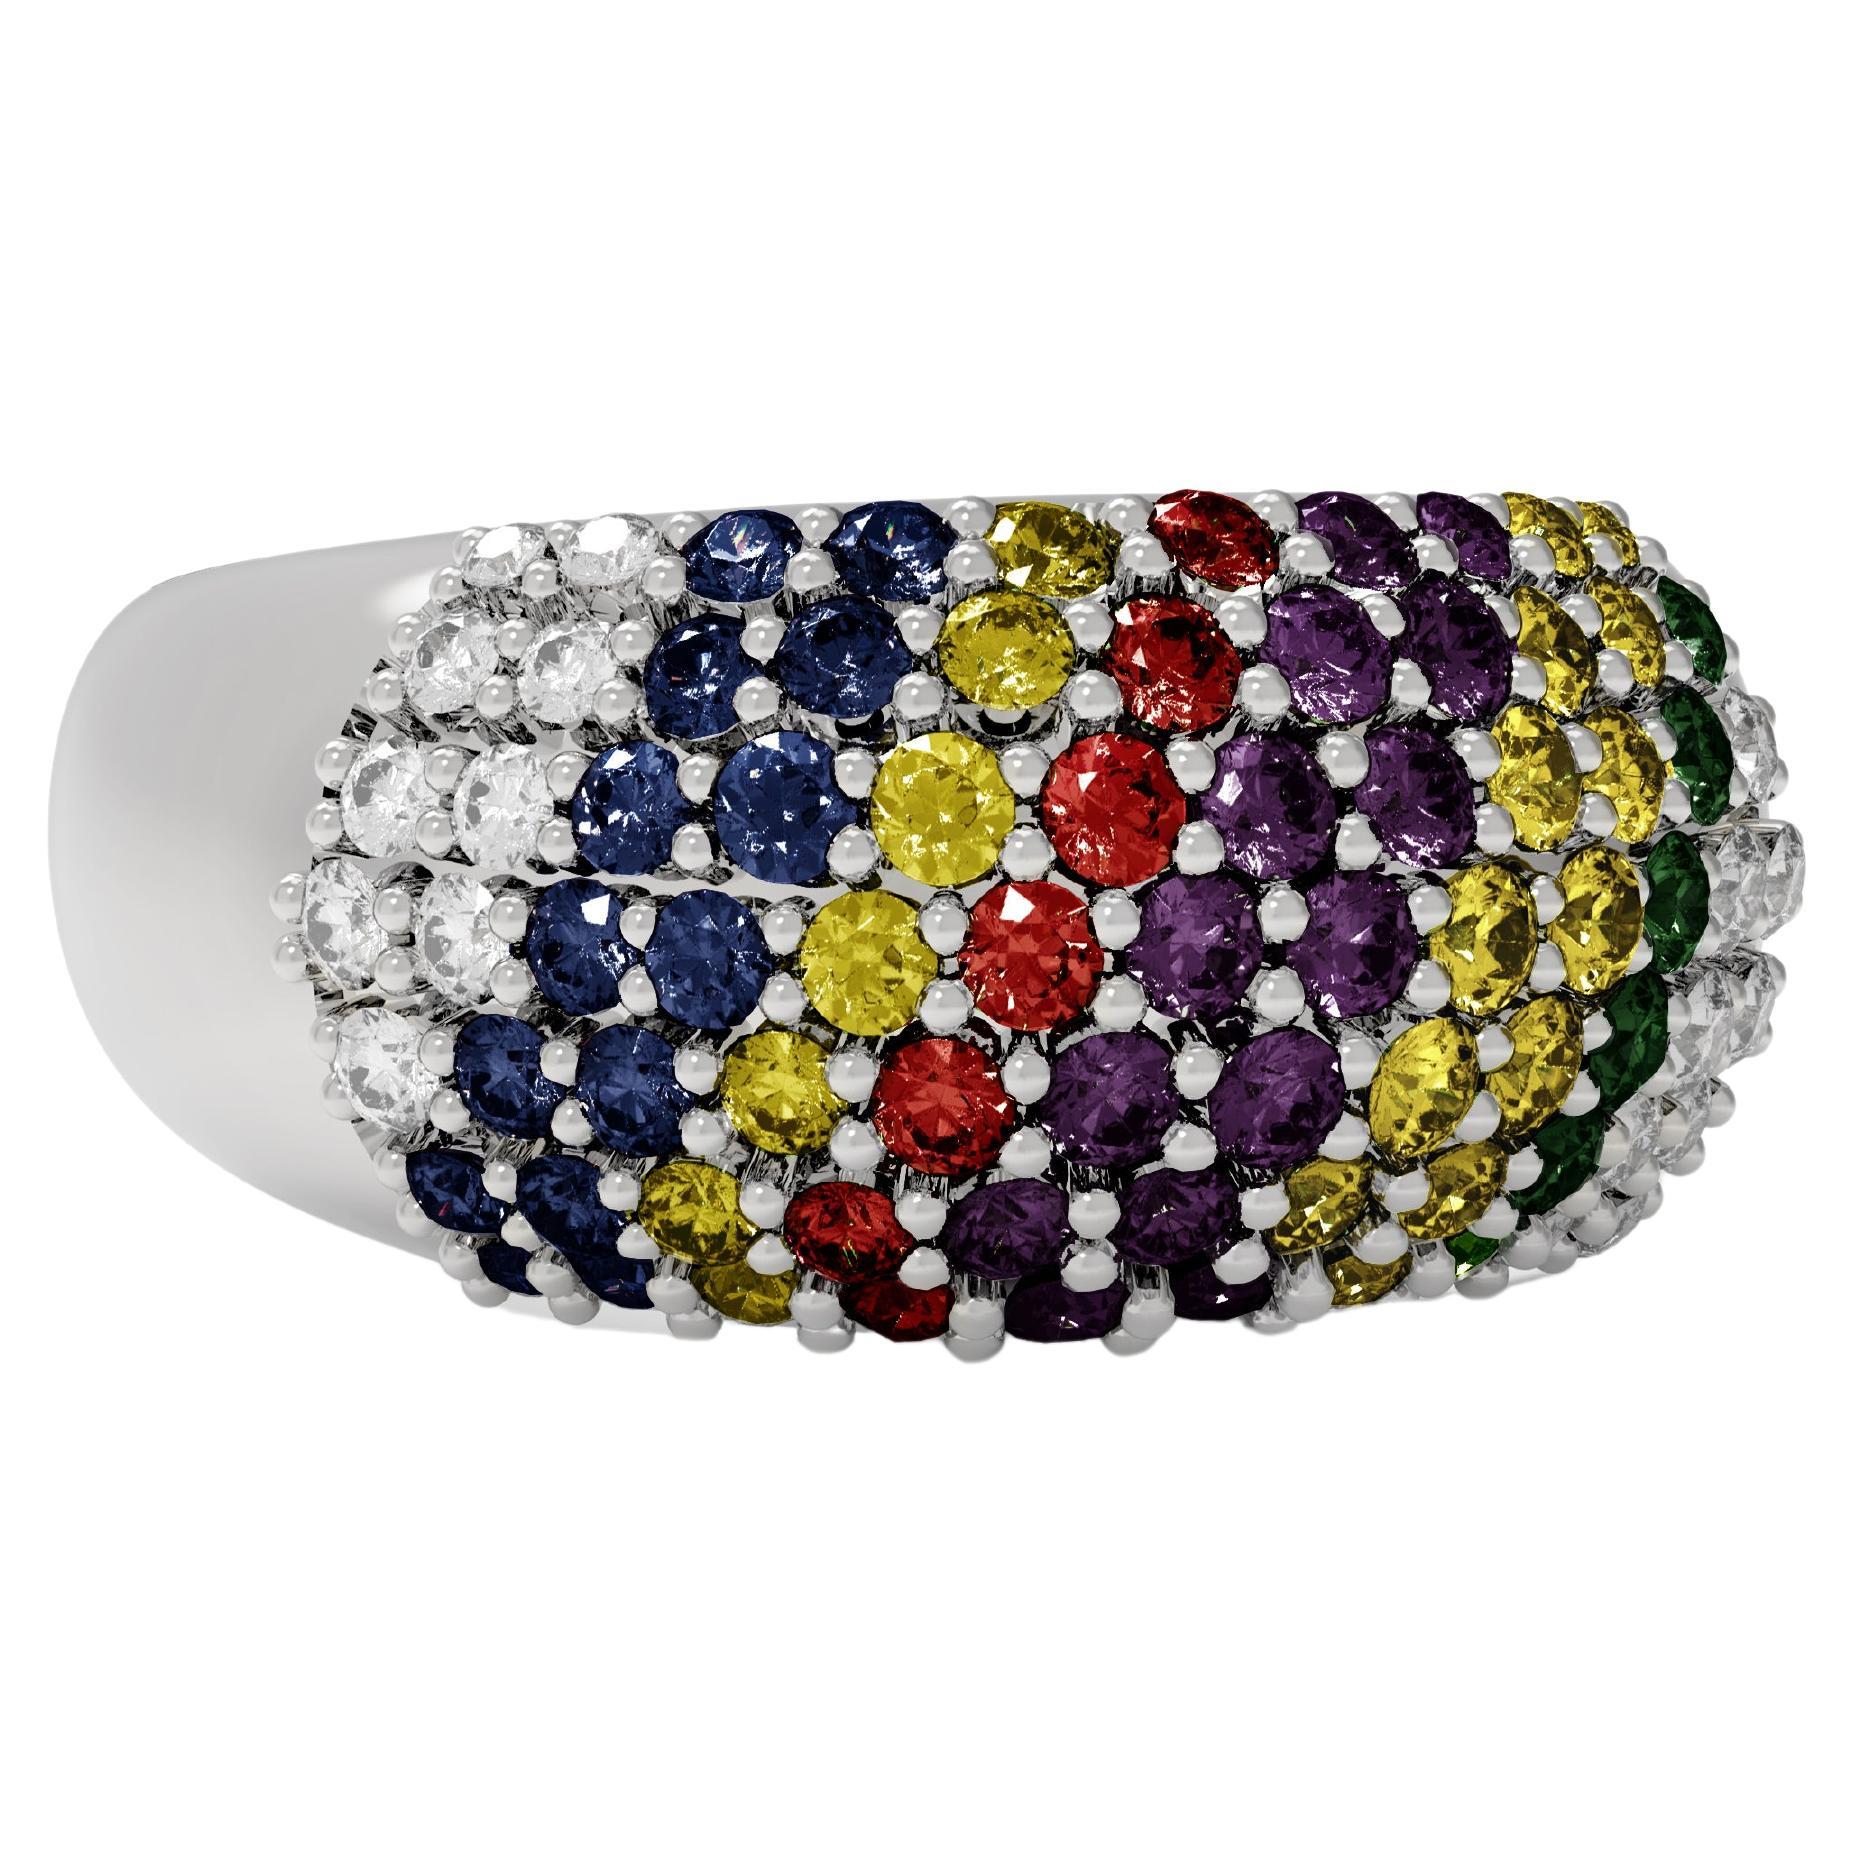 This pave diamonds ring is made of 18 karat white gold with 18 F/G, SI diamonds, 6 emeralds, 13 amethysts, and 42 blue, yellow and red sapphires.
We work with german gems company, that is in the market since 19th century. 
